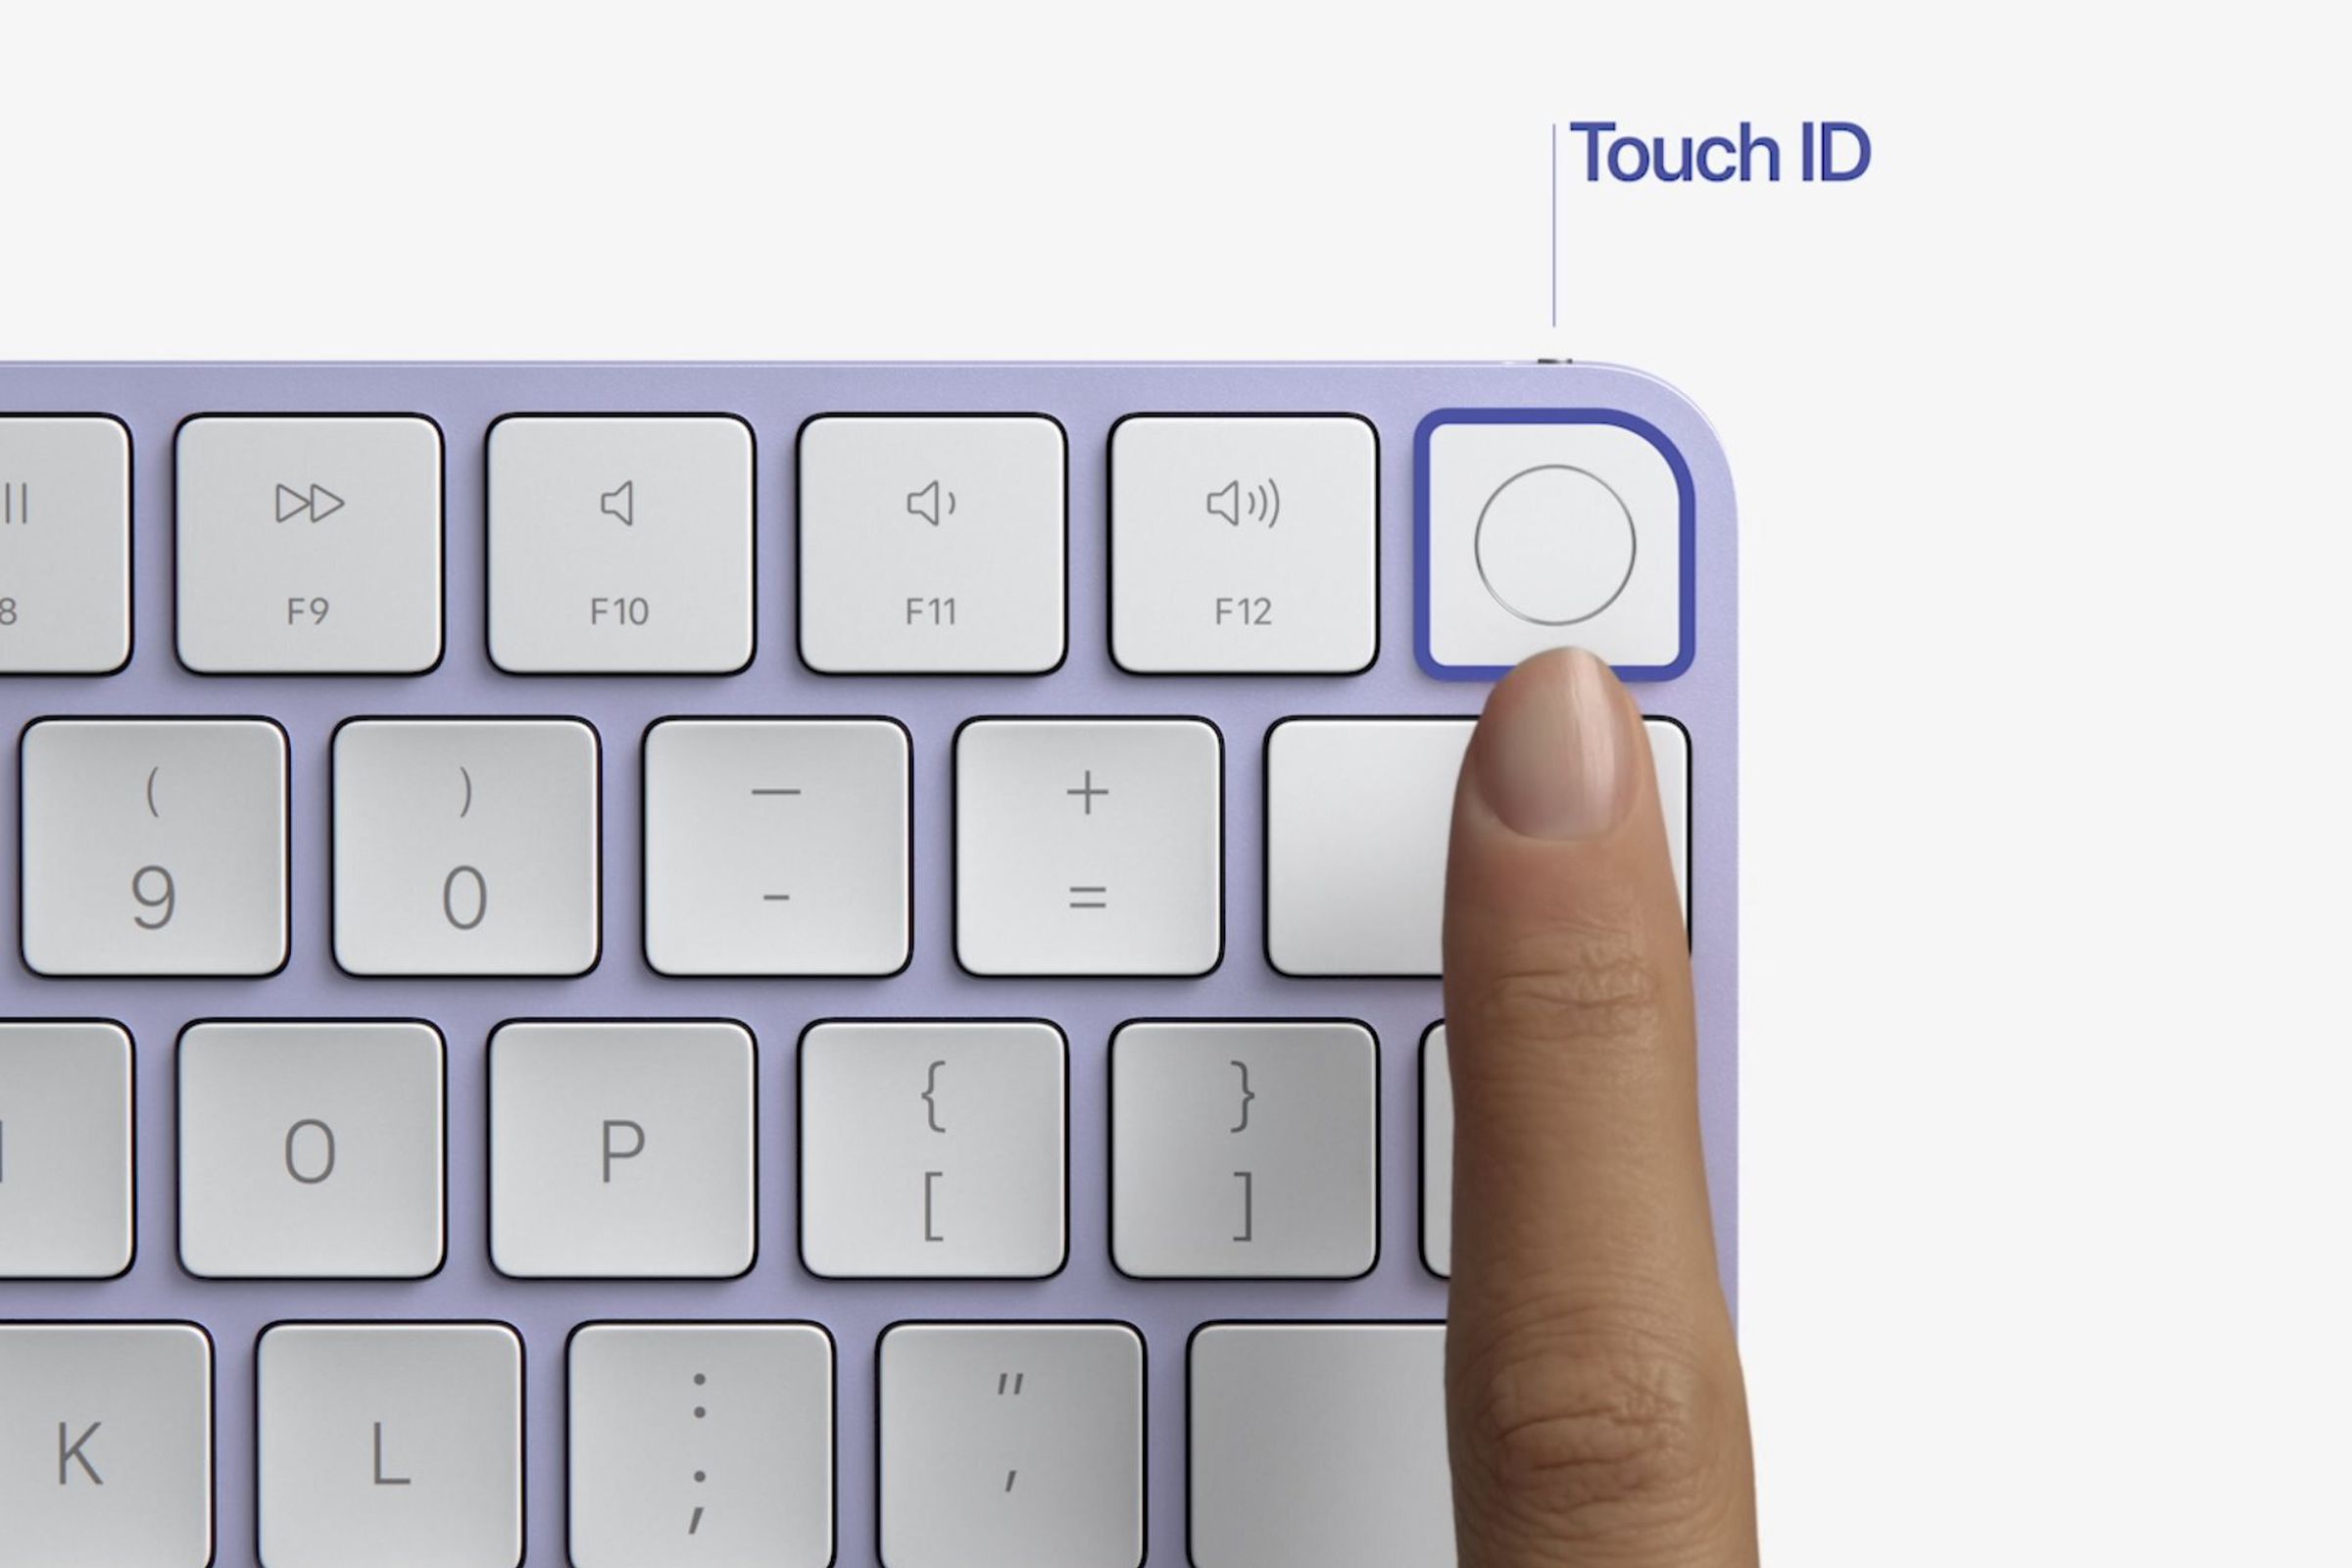 Apple’s Magic Keyboard in purple, with a Touch ID button in the top right corner.